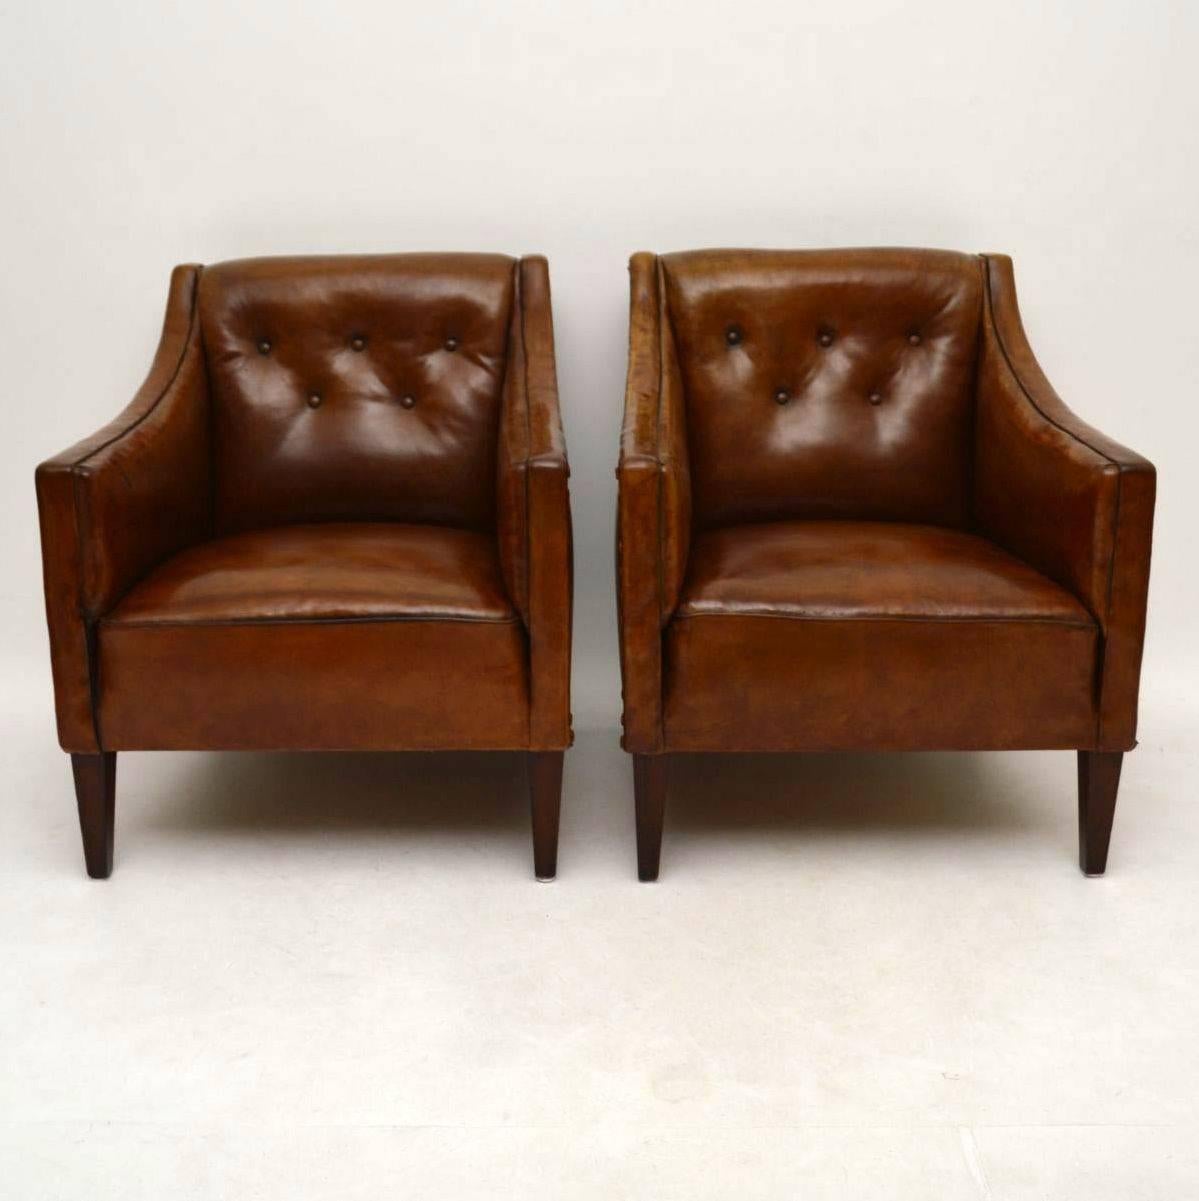 George III Pair of Antique Swedish Leather Armchairs